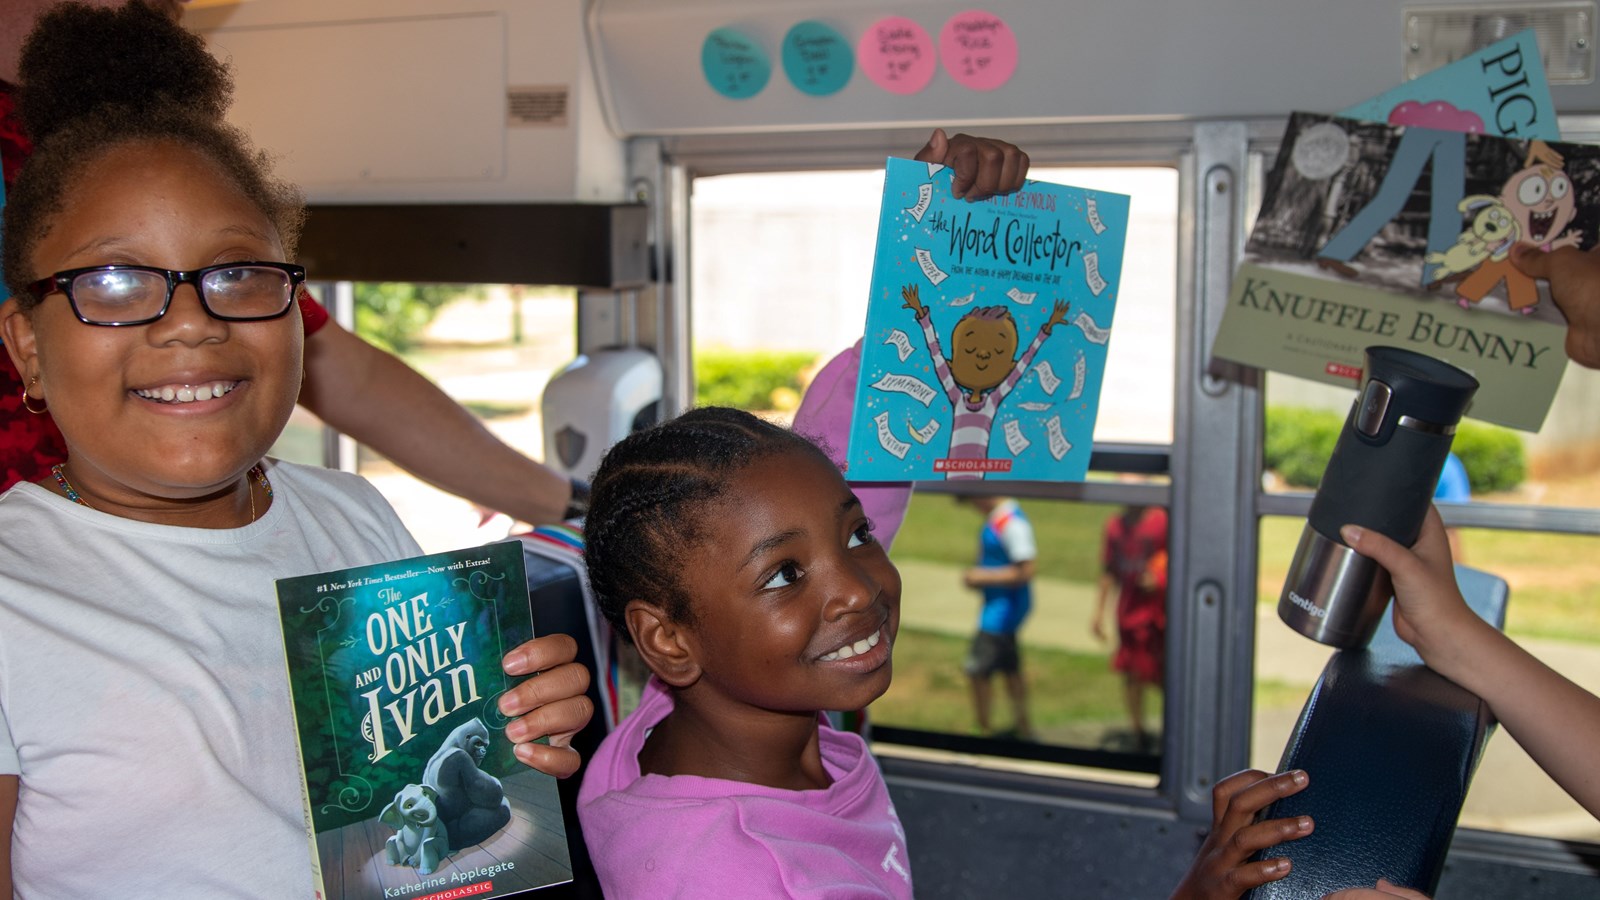 Cobb Schools and Scholastic’s partnership with Books on the Bus allowed students to select books based on their interests and provided additional opportunities for reading to Summer Learning Quest students.